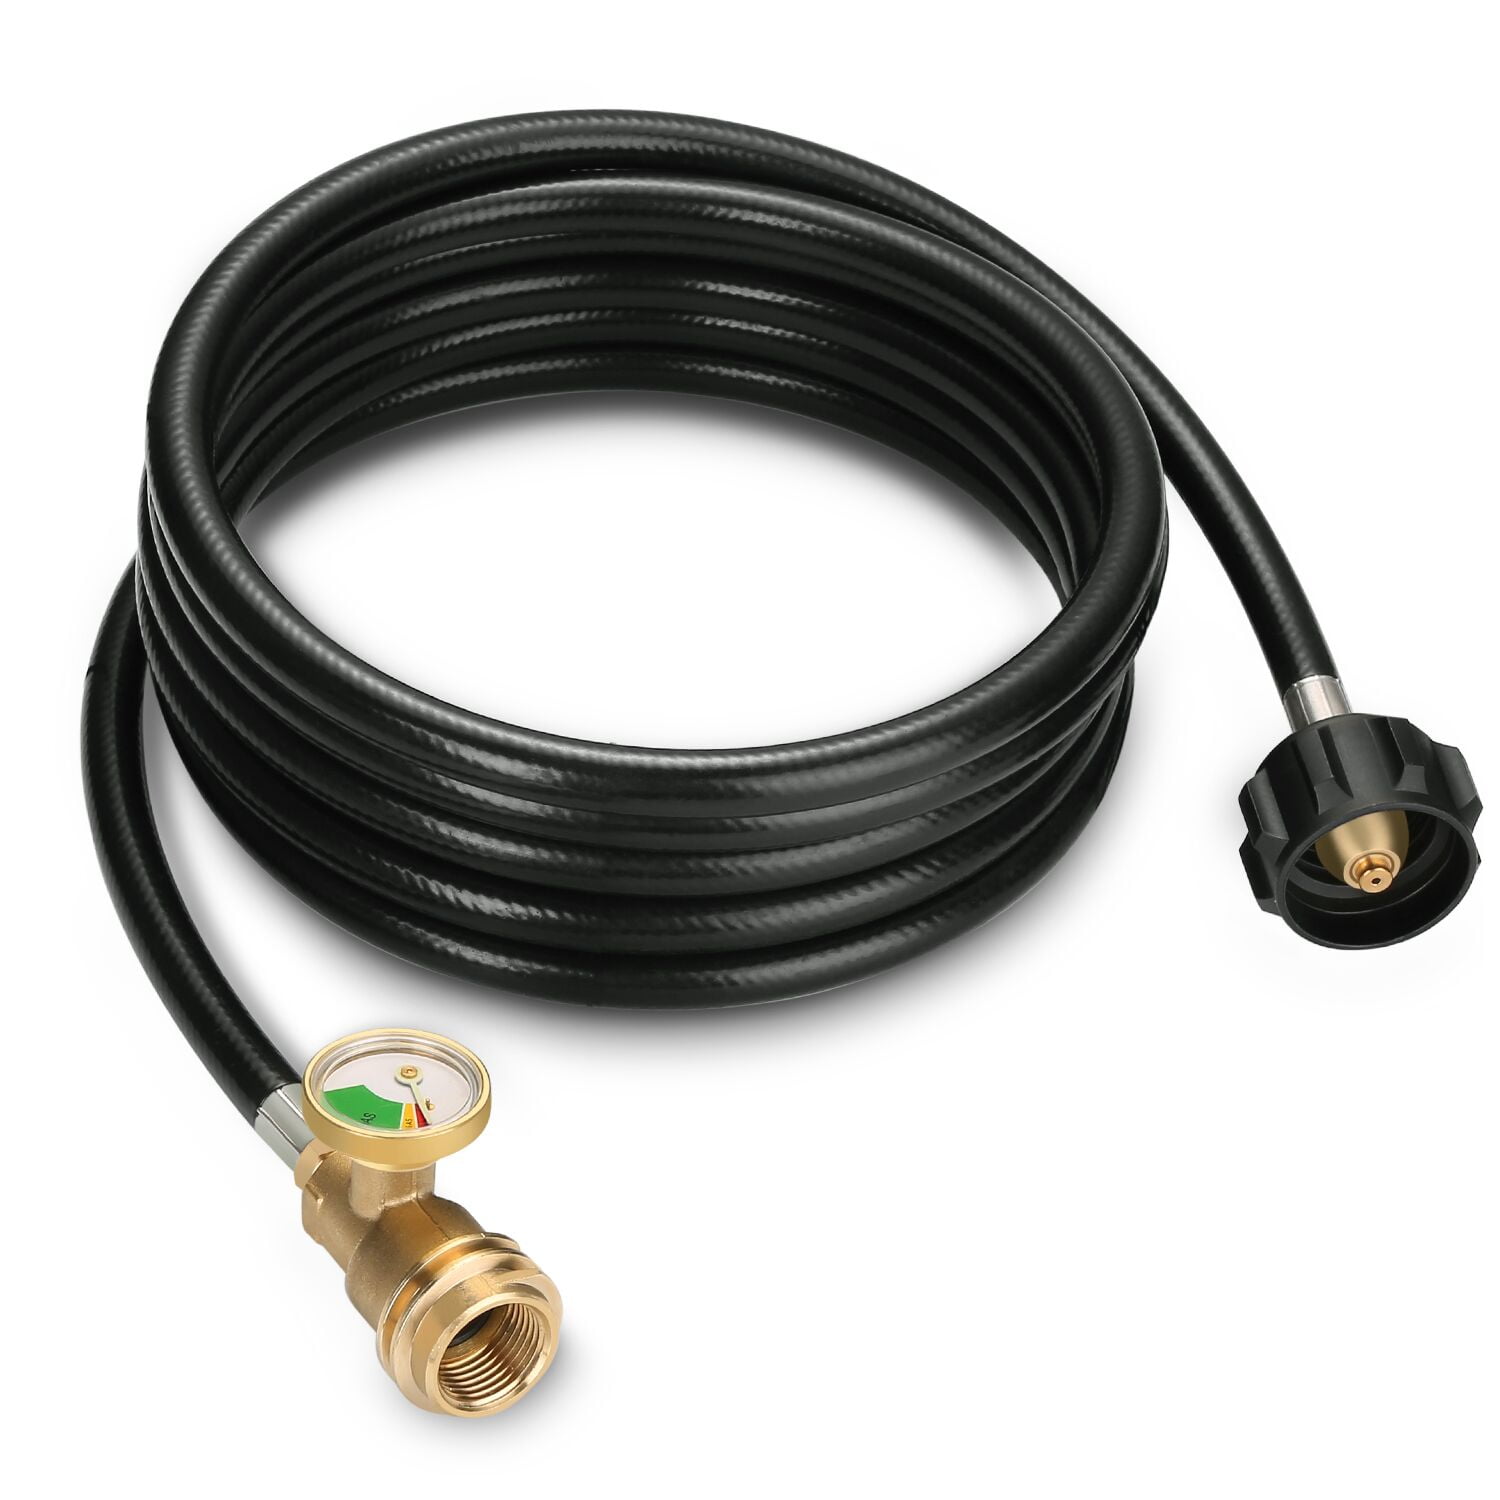 ACME to QCC/POL with gauge 10 foot HIGH FLOW Propane tank EXTENSION HOSE 